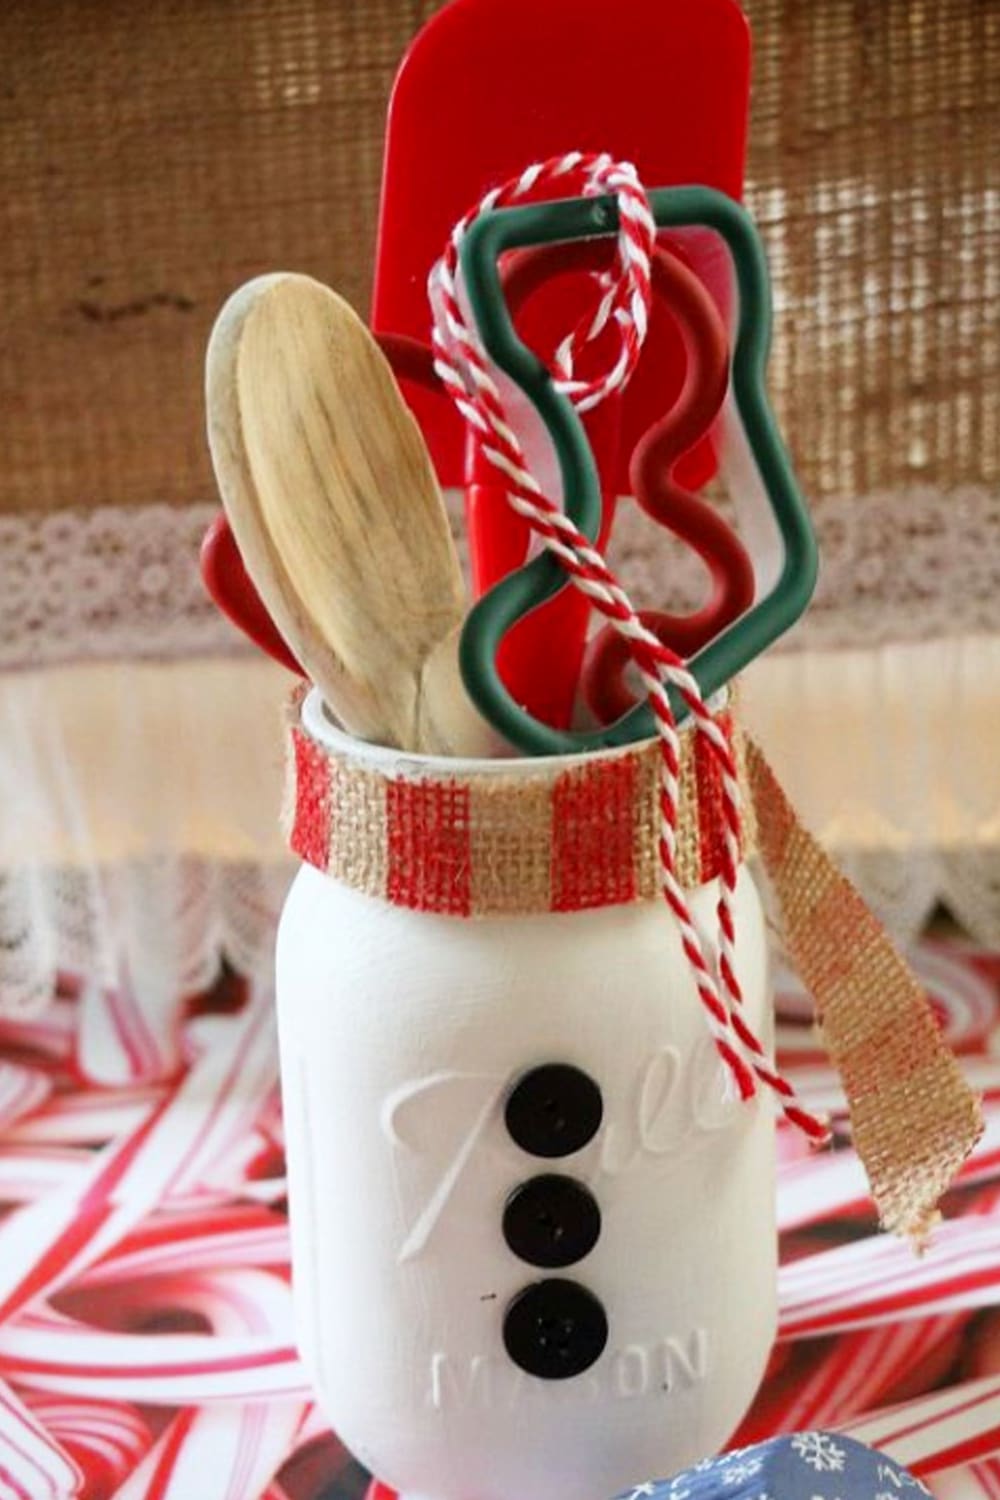 Mason Jar Christmas Gifts and Crafts - Easy Mason Jar Christmas Gift Ideas for Homemade Holiday Gifts for Neighbors, teachers, friends, co-workers and family. Easy DIY Christmas mason jars and Christmas mason jar decorating ideas - how to decorate mason jars for Christmas gifts - DIY Mason Jar Gifts and Cute Mason Jar Ideas For Christmas Presents